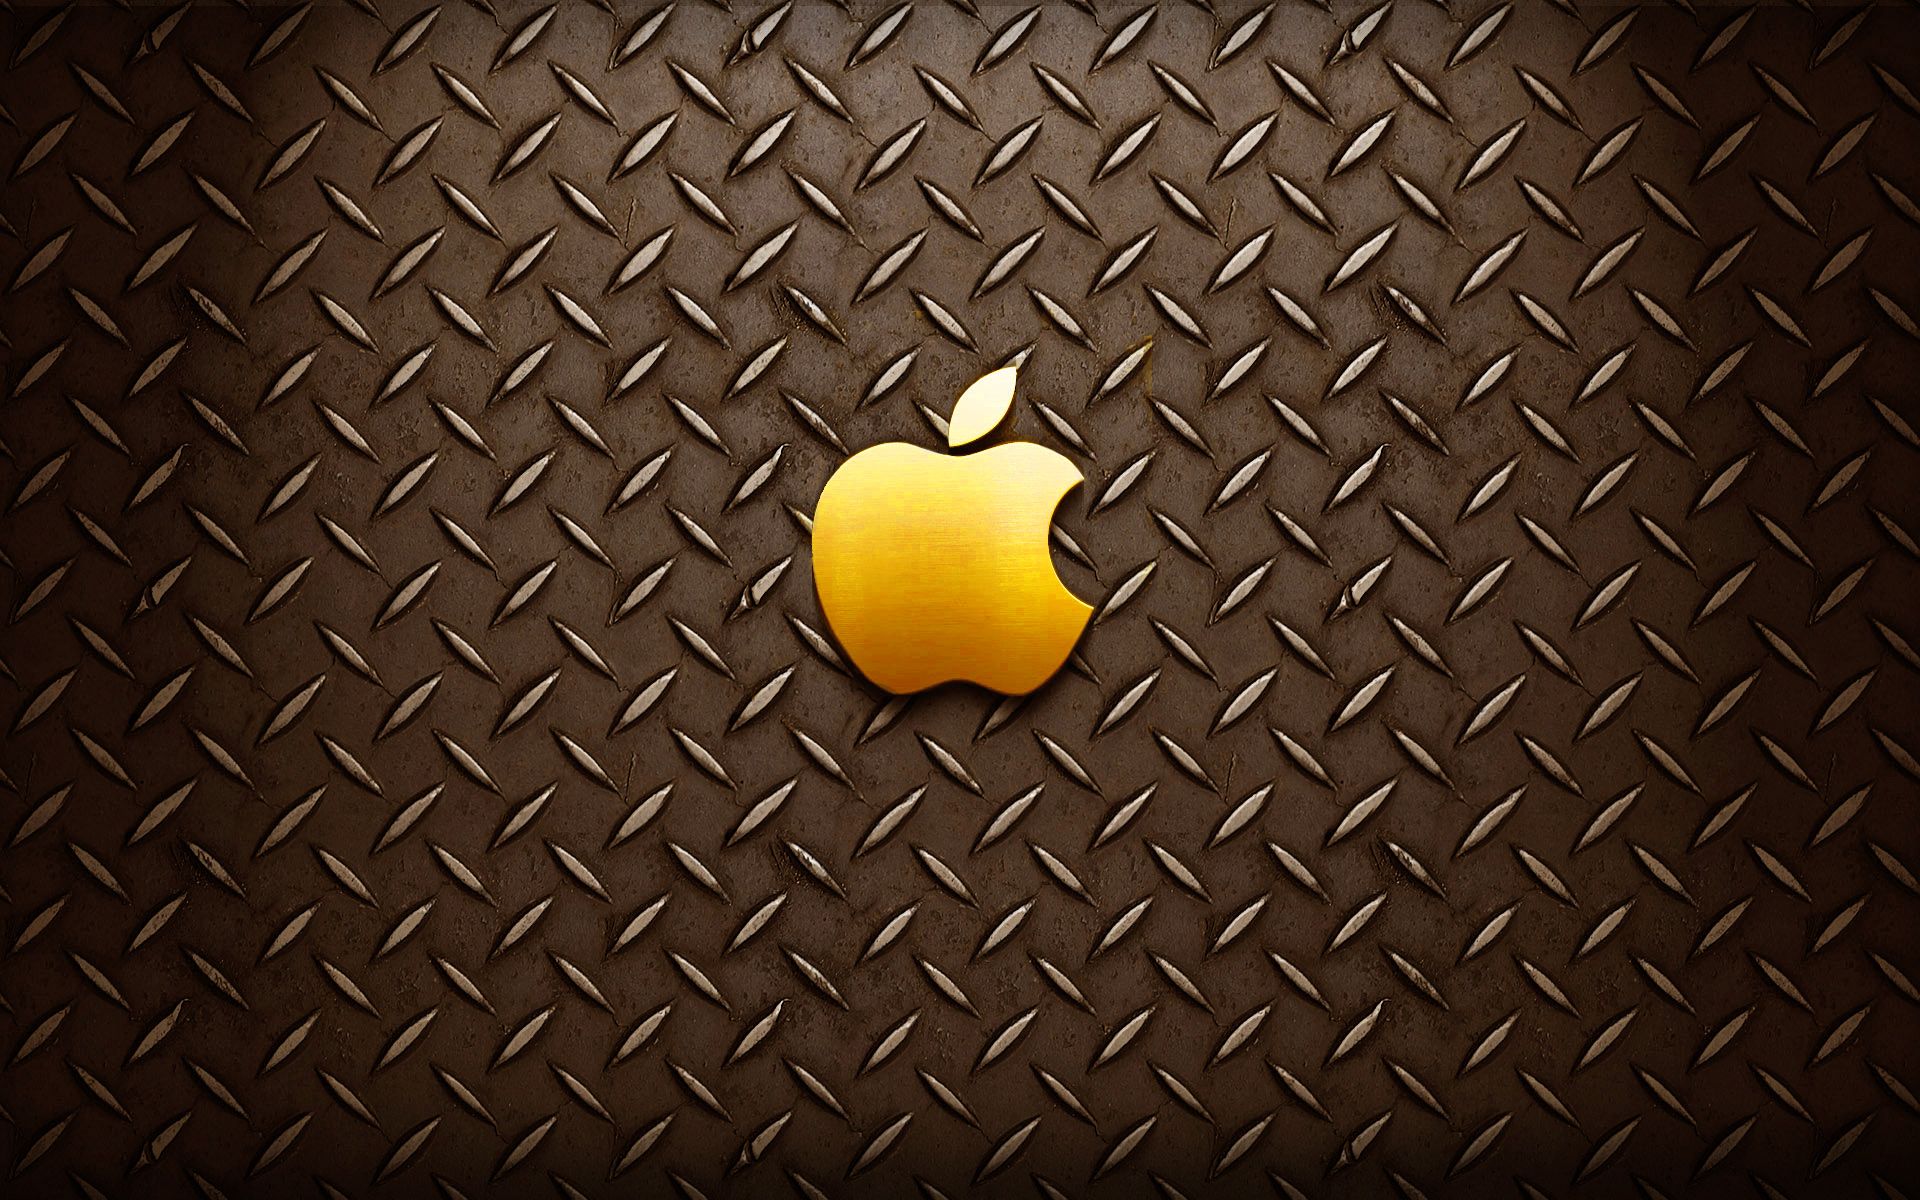 Gold Apple Logo Wallpaper Pictures In High Definition Or